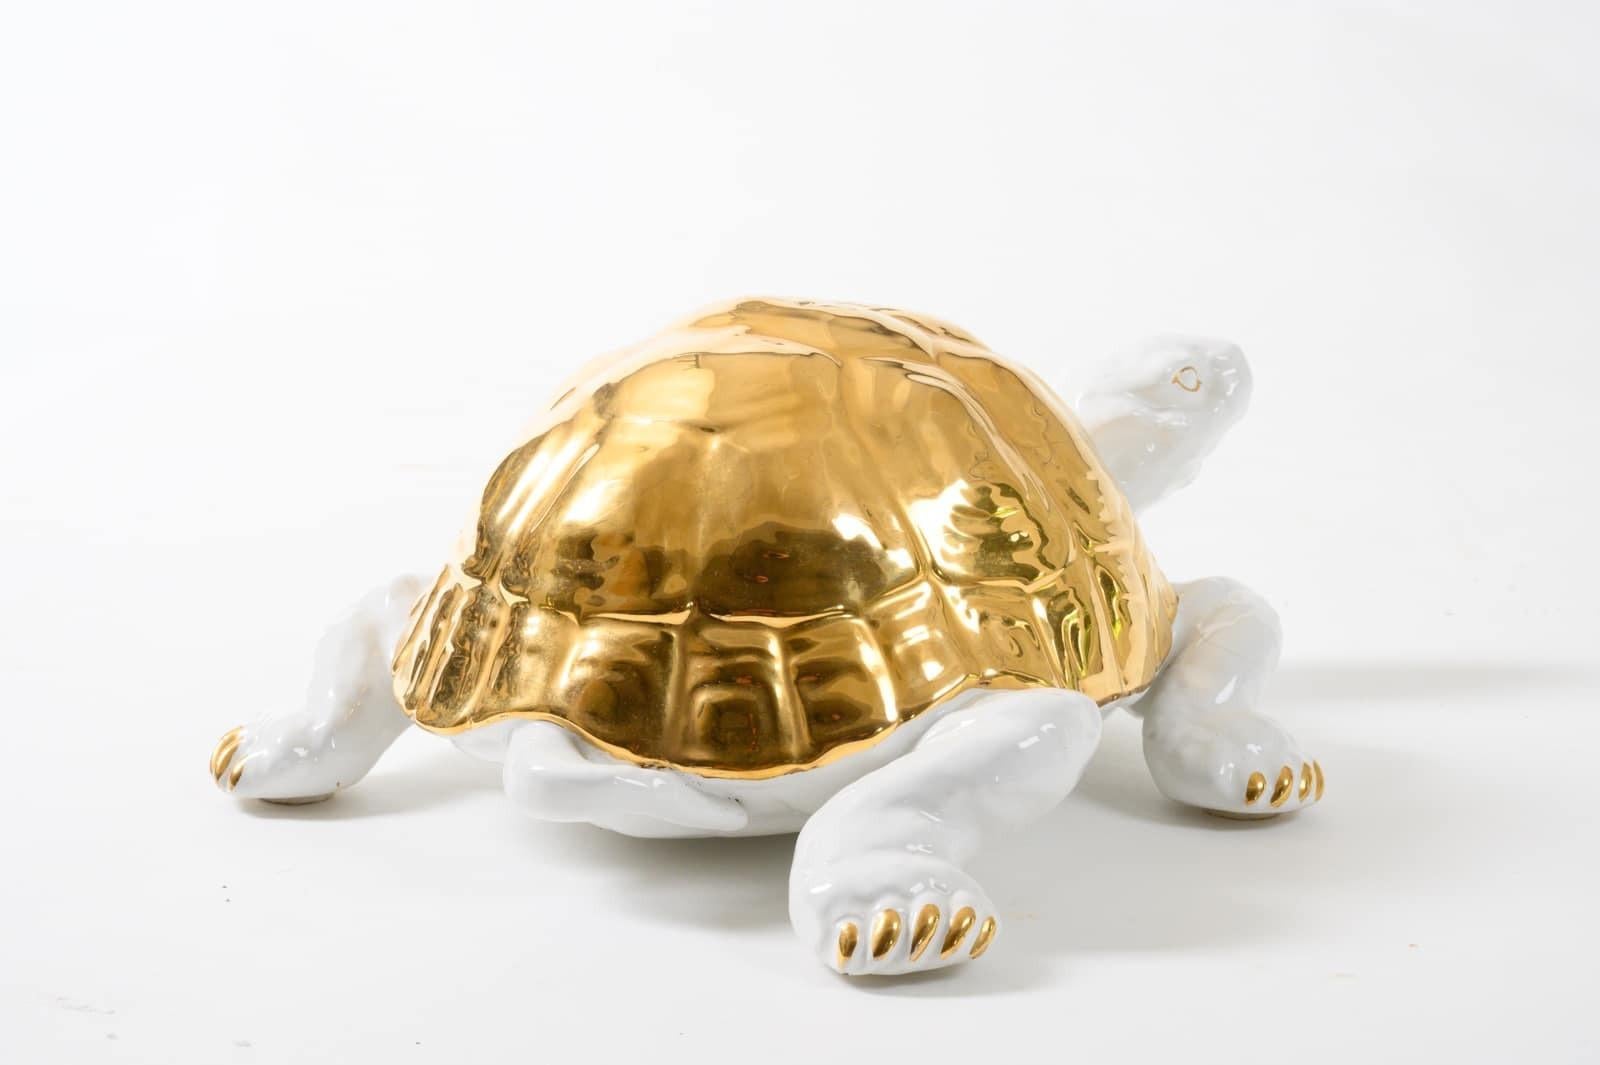 Cute, chic white ceramic tortoise with gold detailing by Ronzan. Signed to the underside “Ronzan” ” Made in Italy” & the number 1640, Italy, circa 1970.